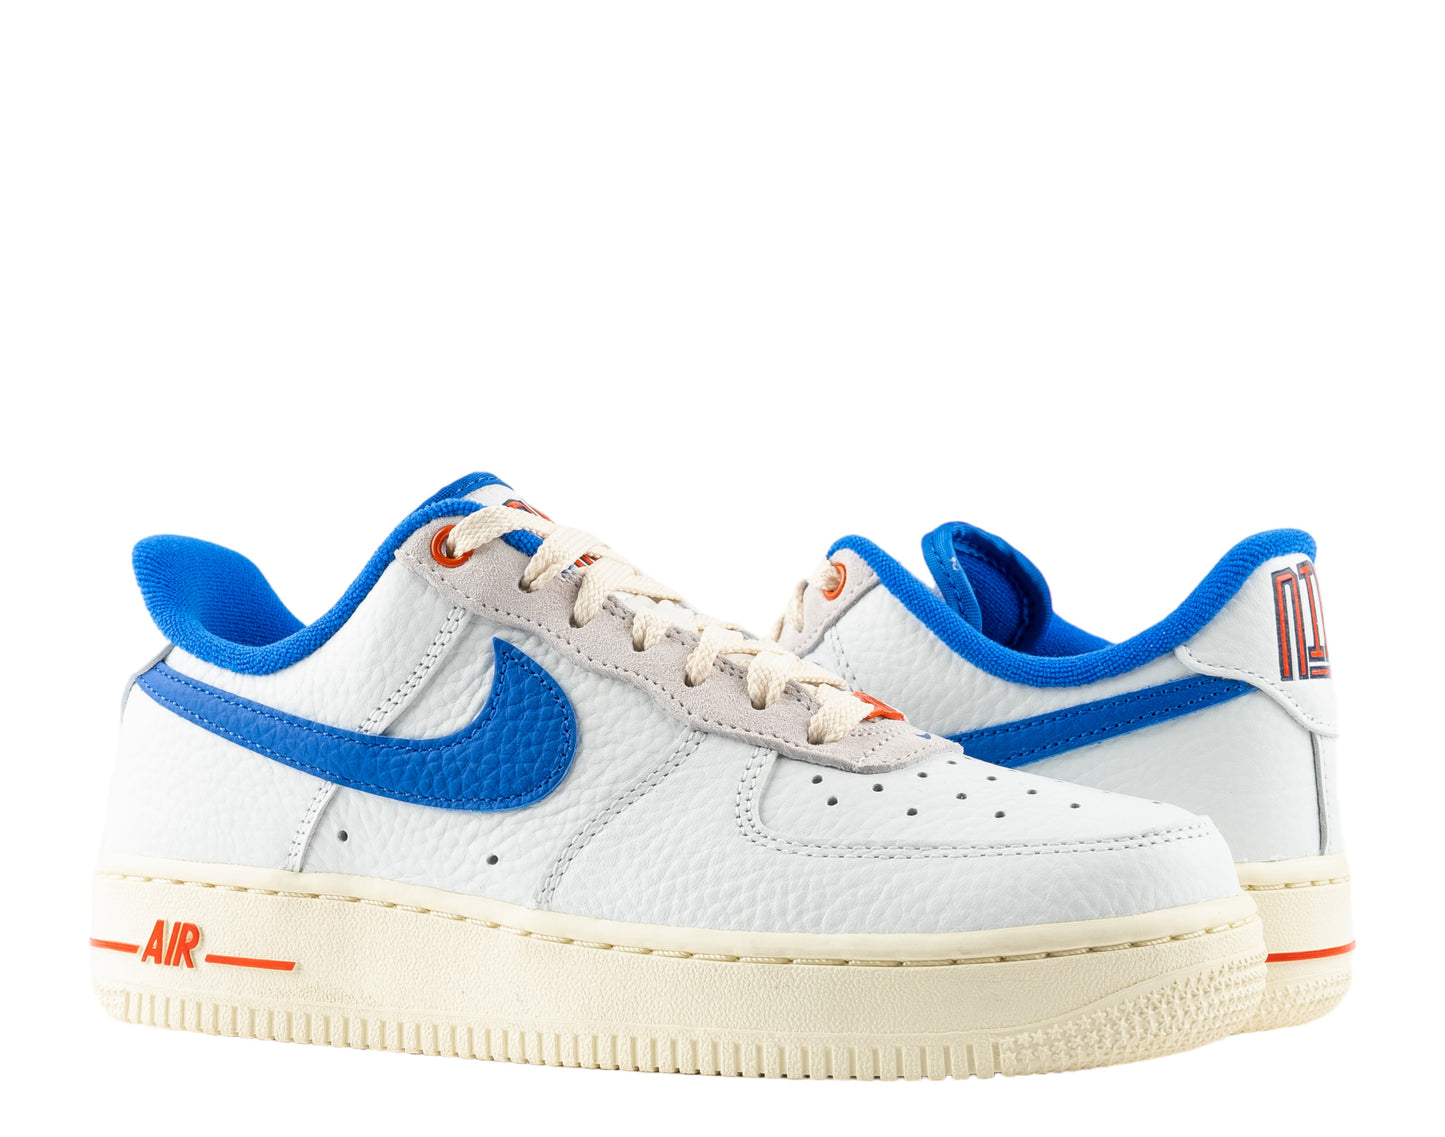 Nike Air Force 1 Low '07 LX Women's Basketball Shoes